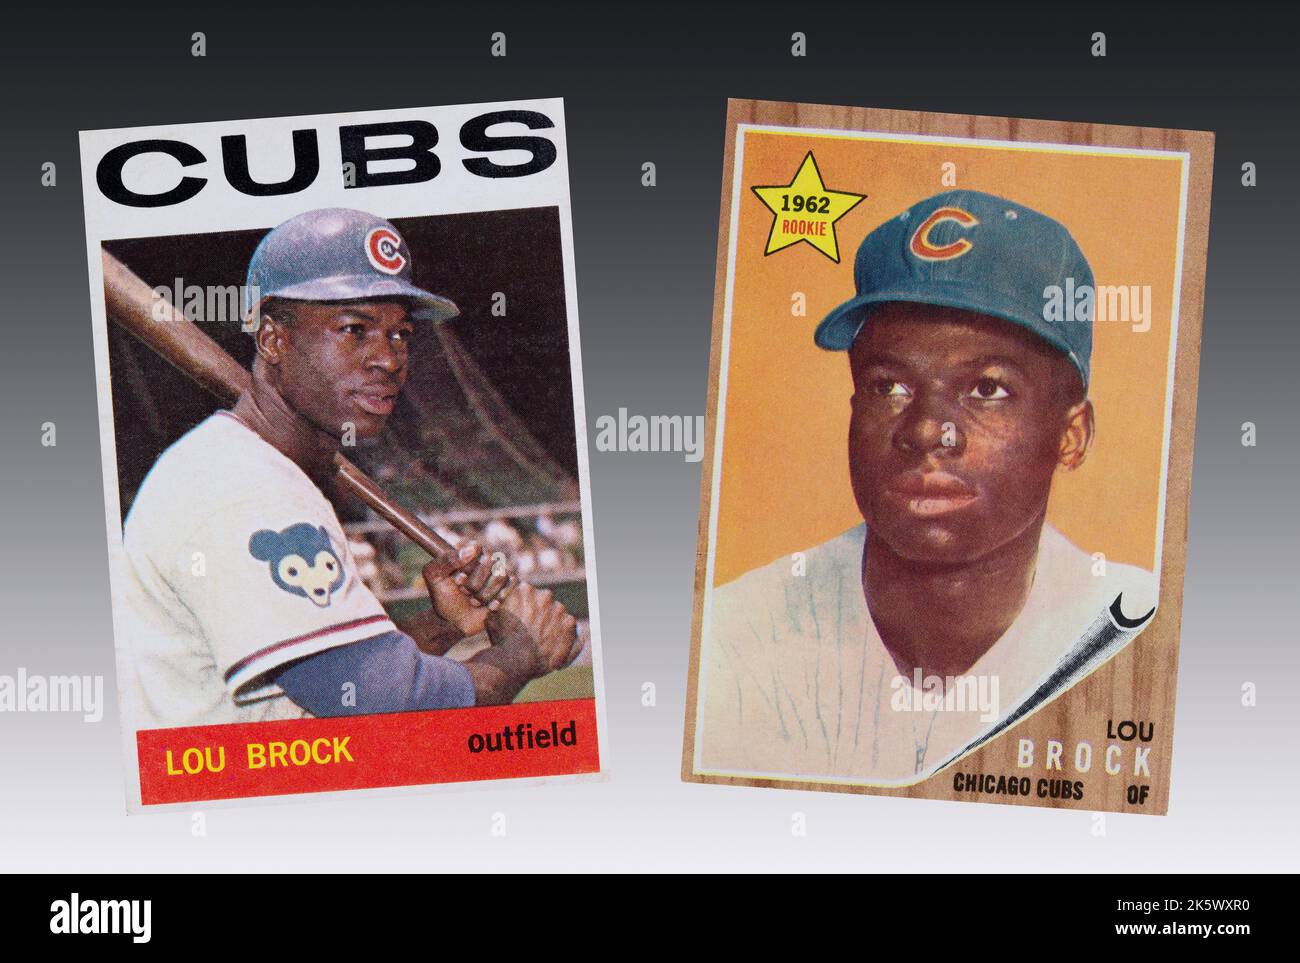 1964 Chicago Cubs baseball card of Lou Brock in his last year with the cubs and his 1962 rookie card.  Lou was traded to the St. Louis Cardinals durin Stock Photo